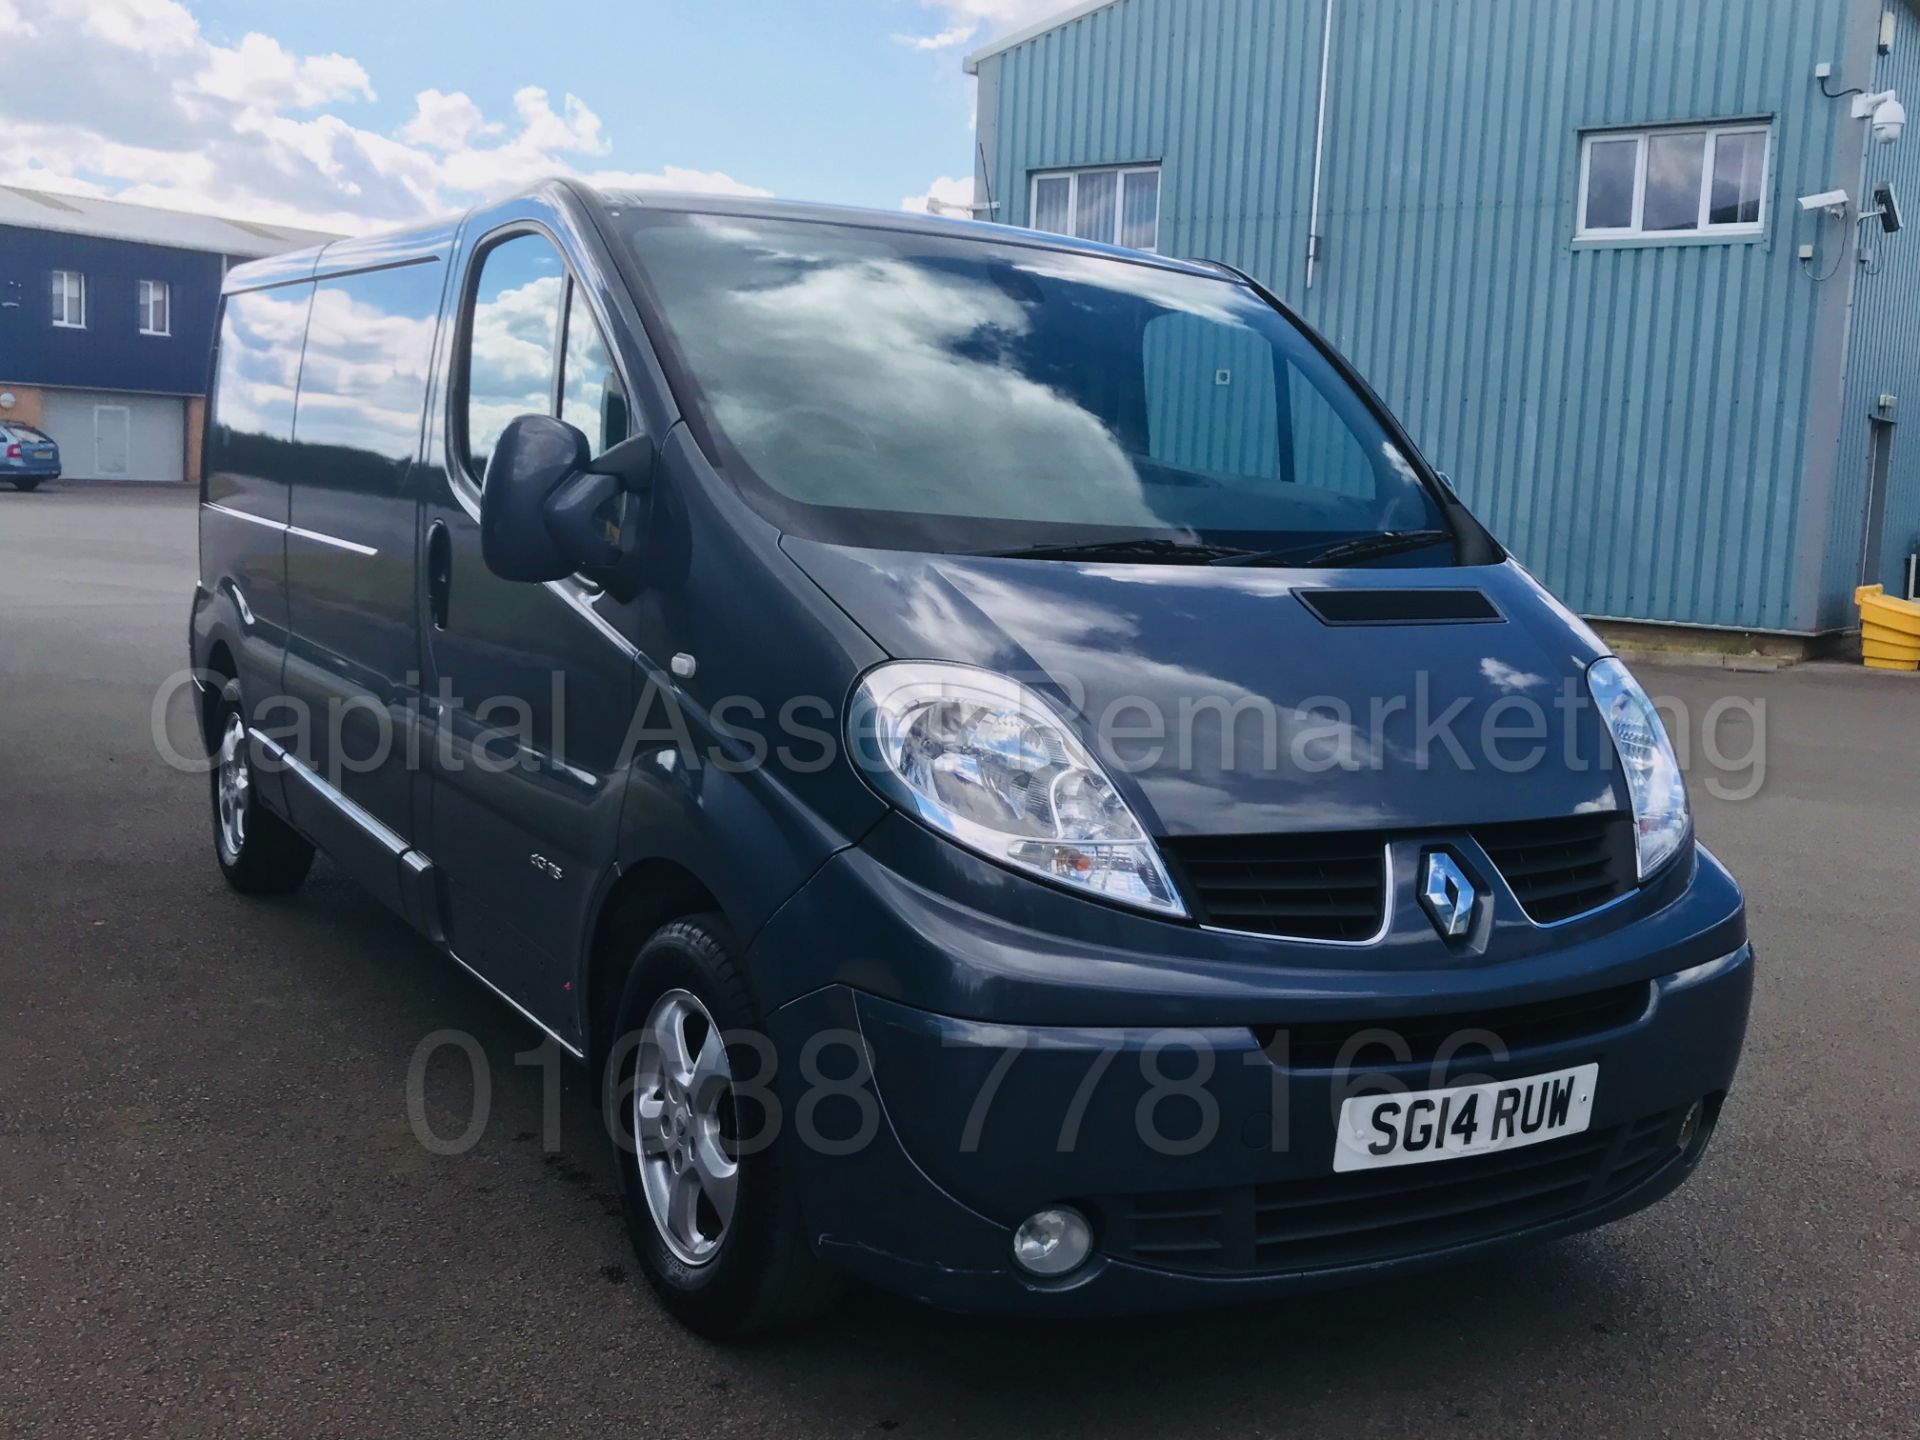 (On Sale) RENAULT TRAFIC 'SPORT EDITION' LWB (2014) '2.0 DCI - 115 BHP - 6 SPEED' *AIR CON* (NO VAT) - Image 12 of 40